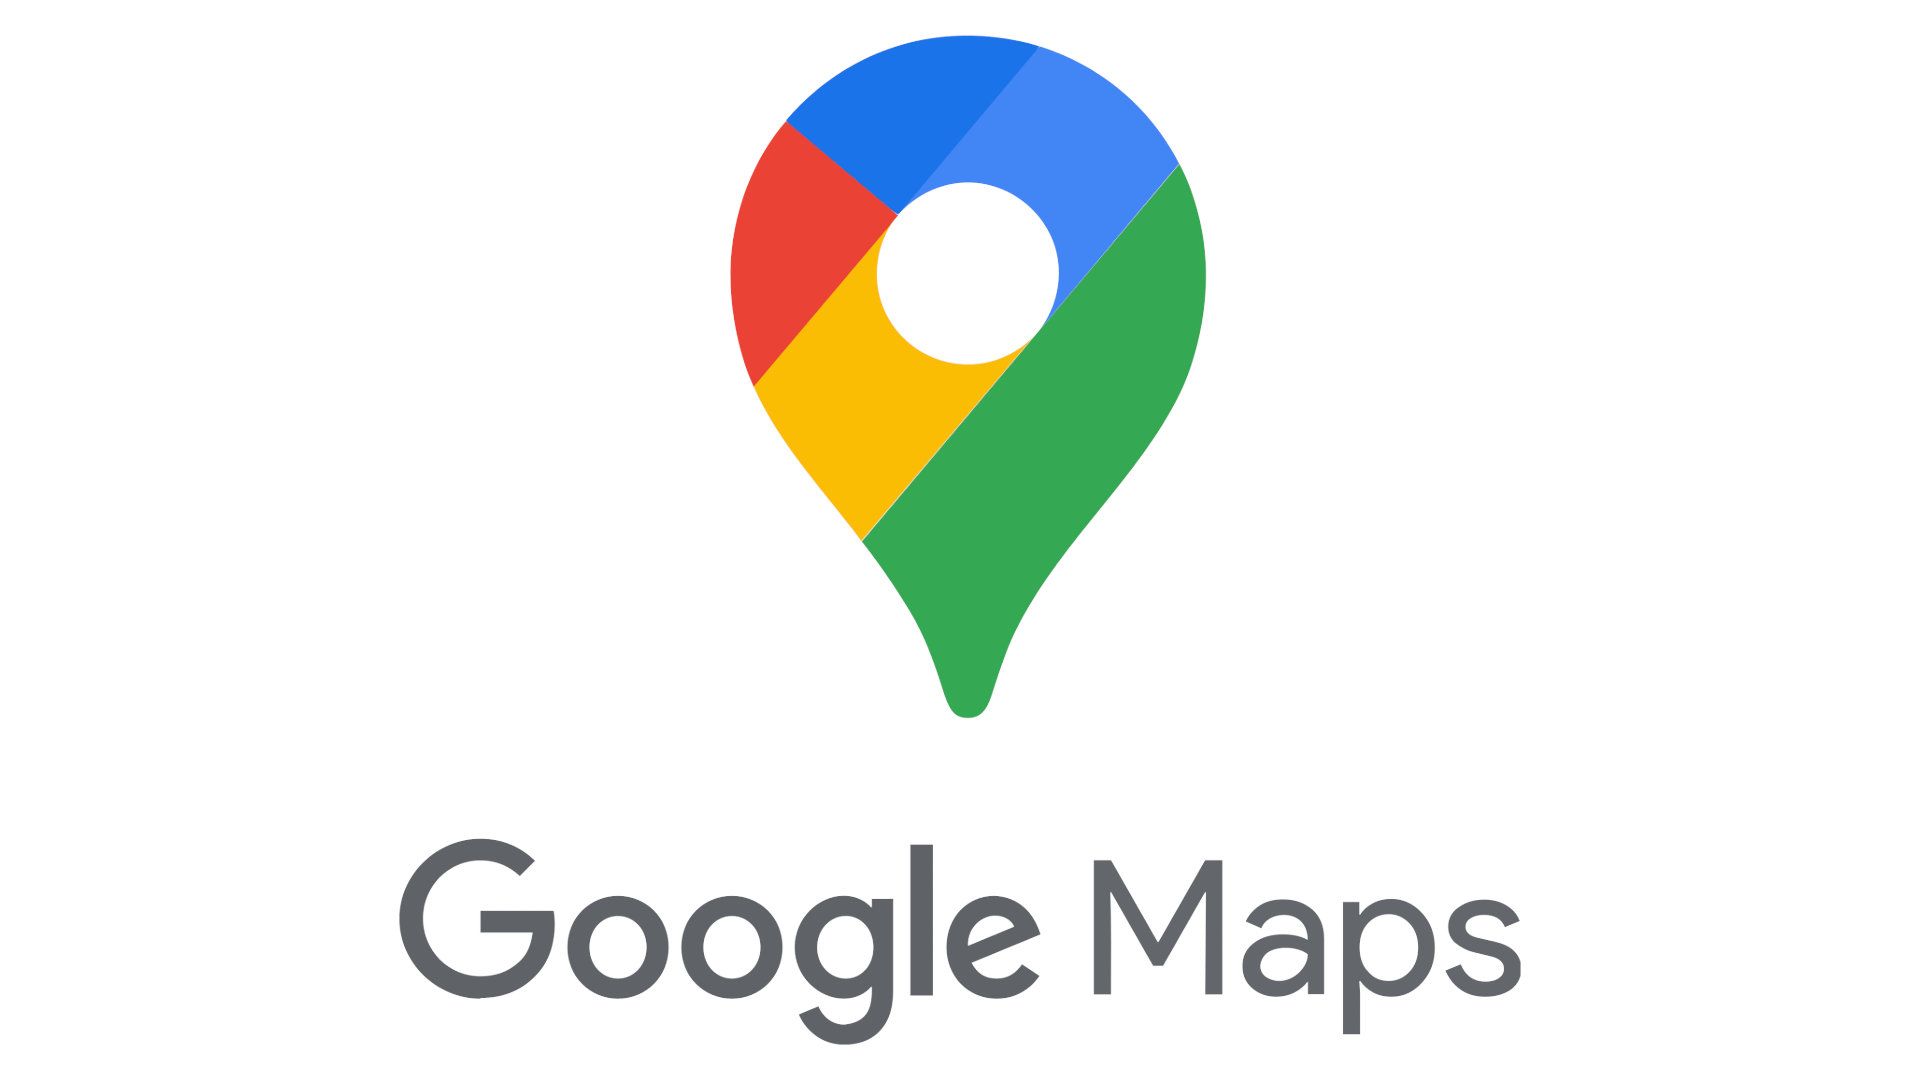 The Google Maps logo appears on a white background.